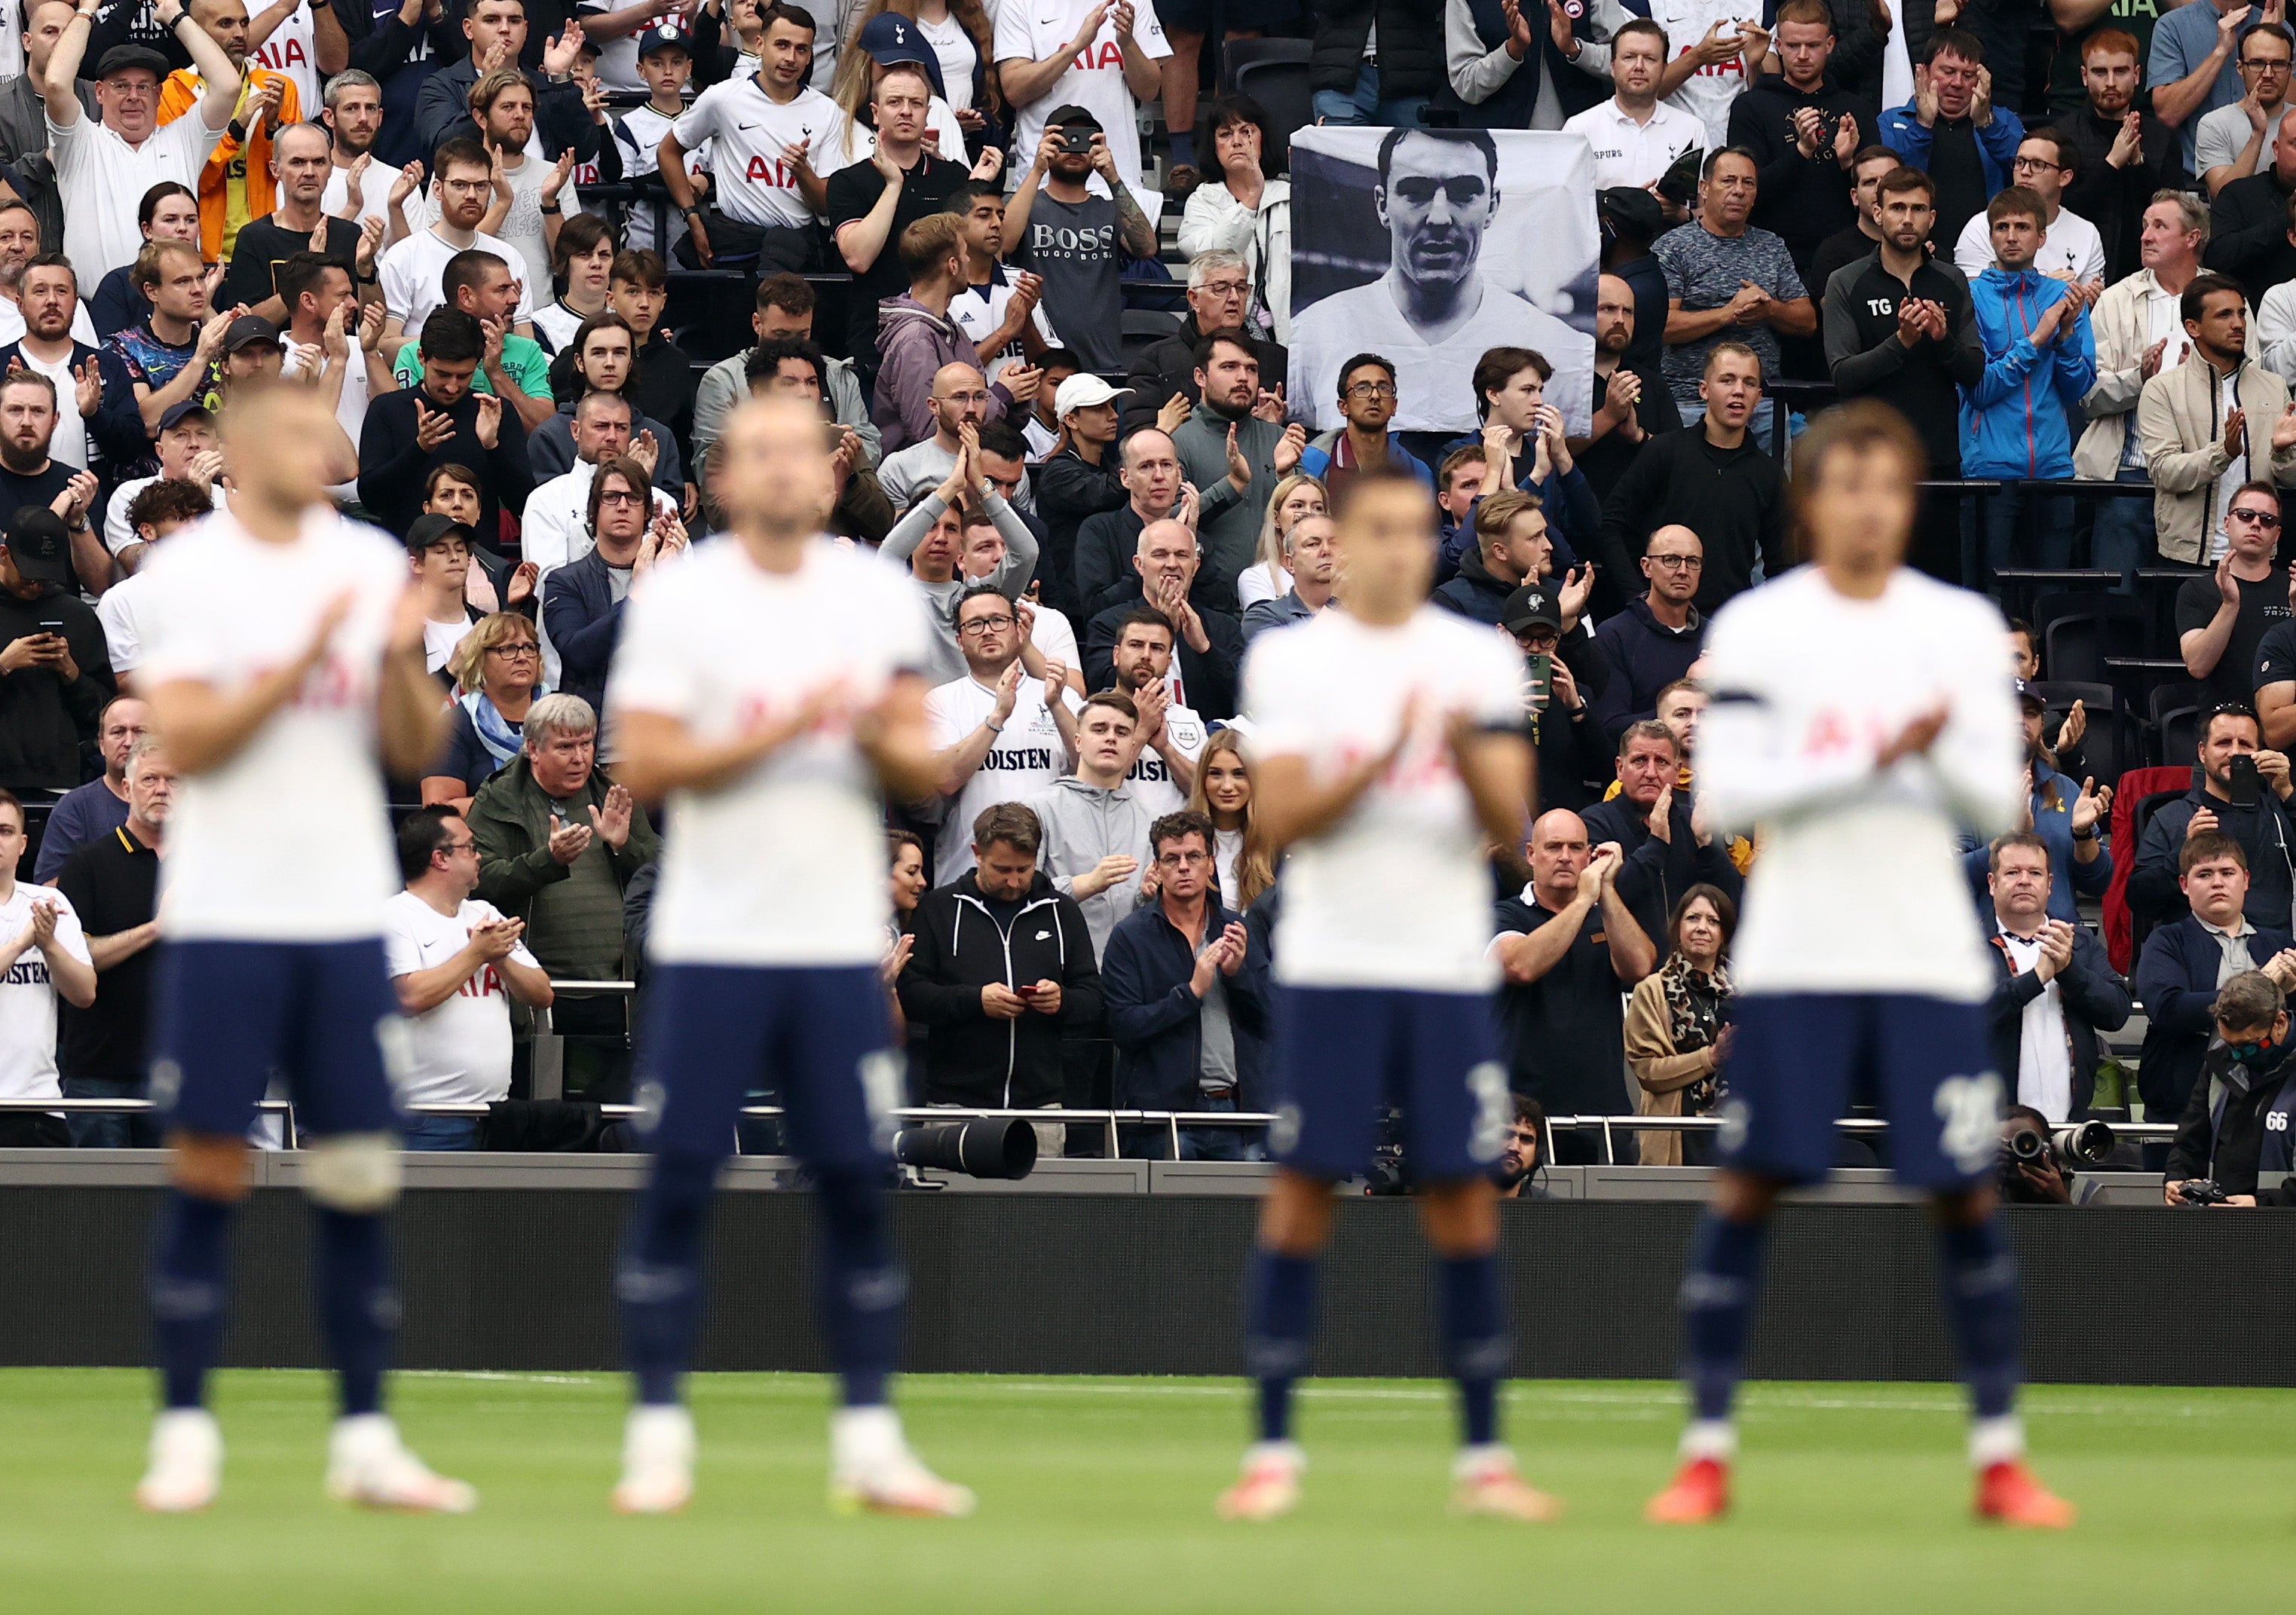 Tottenham players and supporters applaud the life of Jimmy Greaves before kick-off